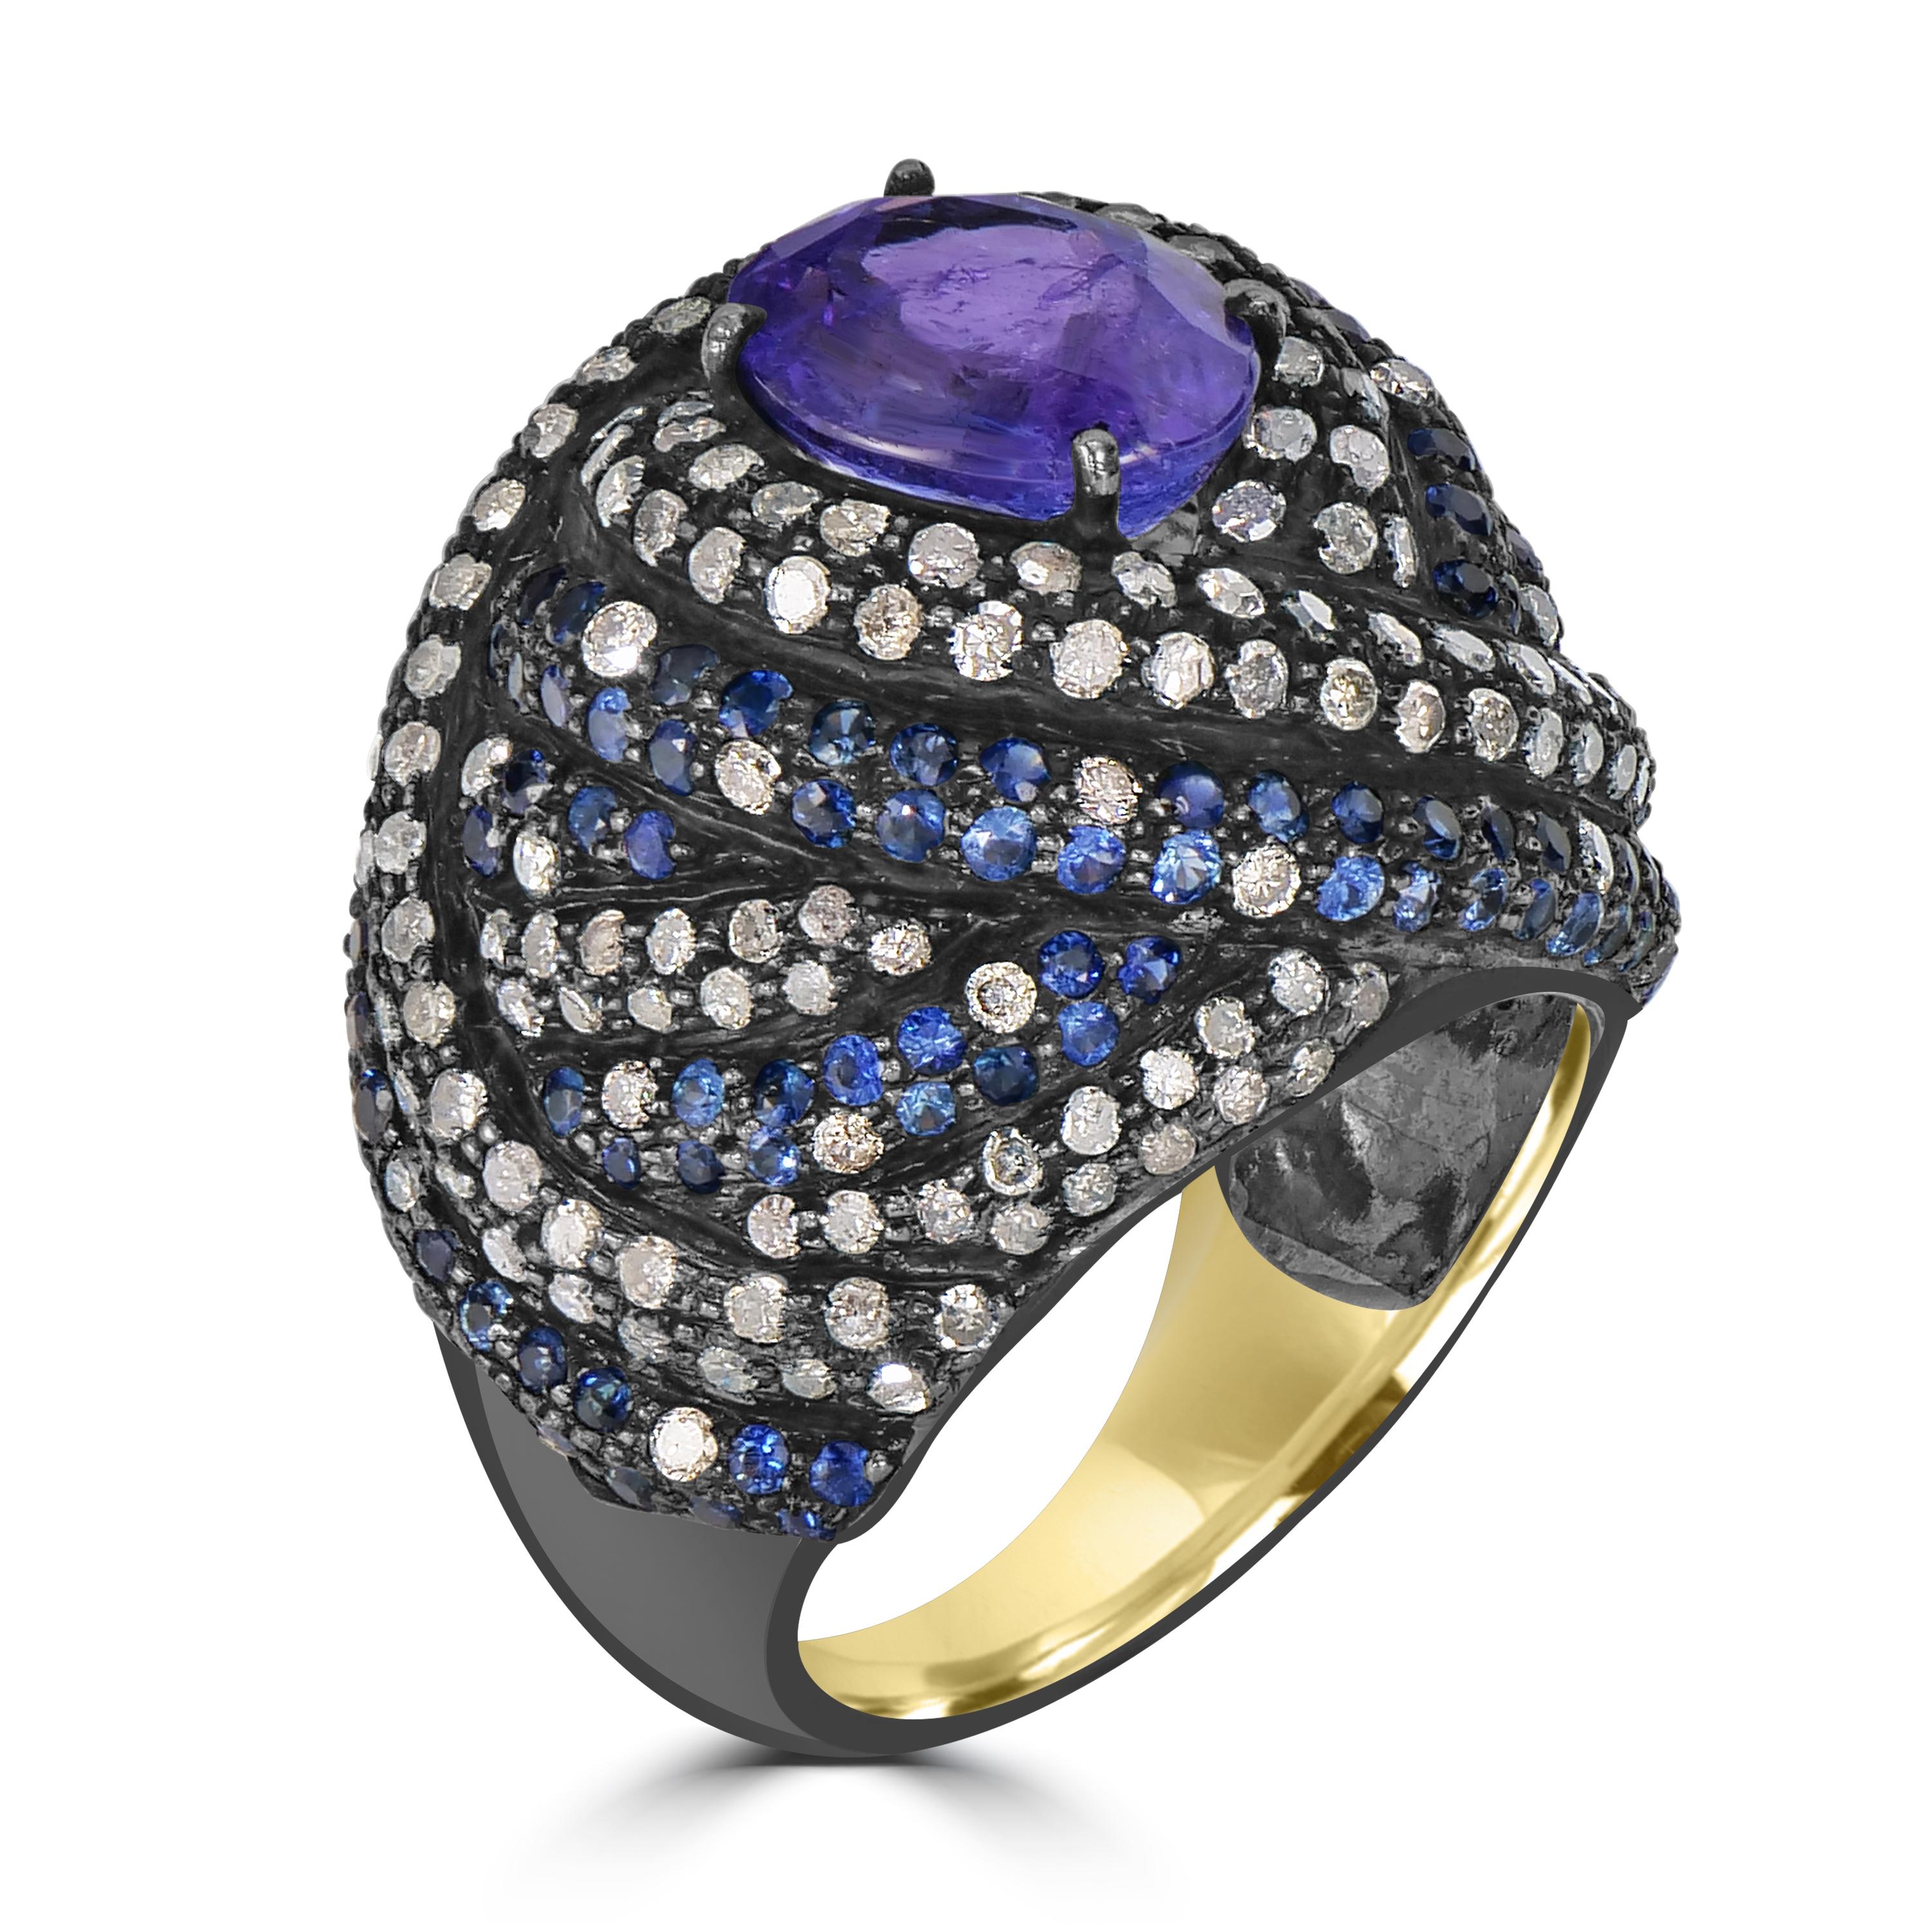 Embark on a journey of unparalleled luxury with this exquisite Dome Ring, a masterpiece that seamlessly blends the richness of tanzanite, the sparkle of diamonds, and the allure of blue sapphires. The ring's crown jewel is a captivating tanzanite at